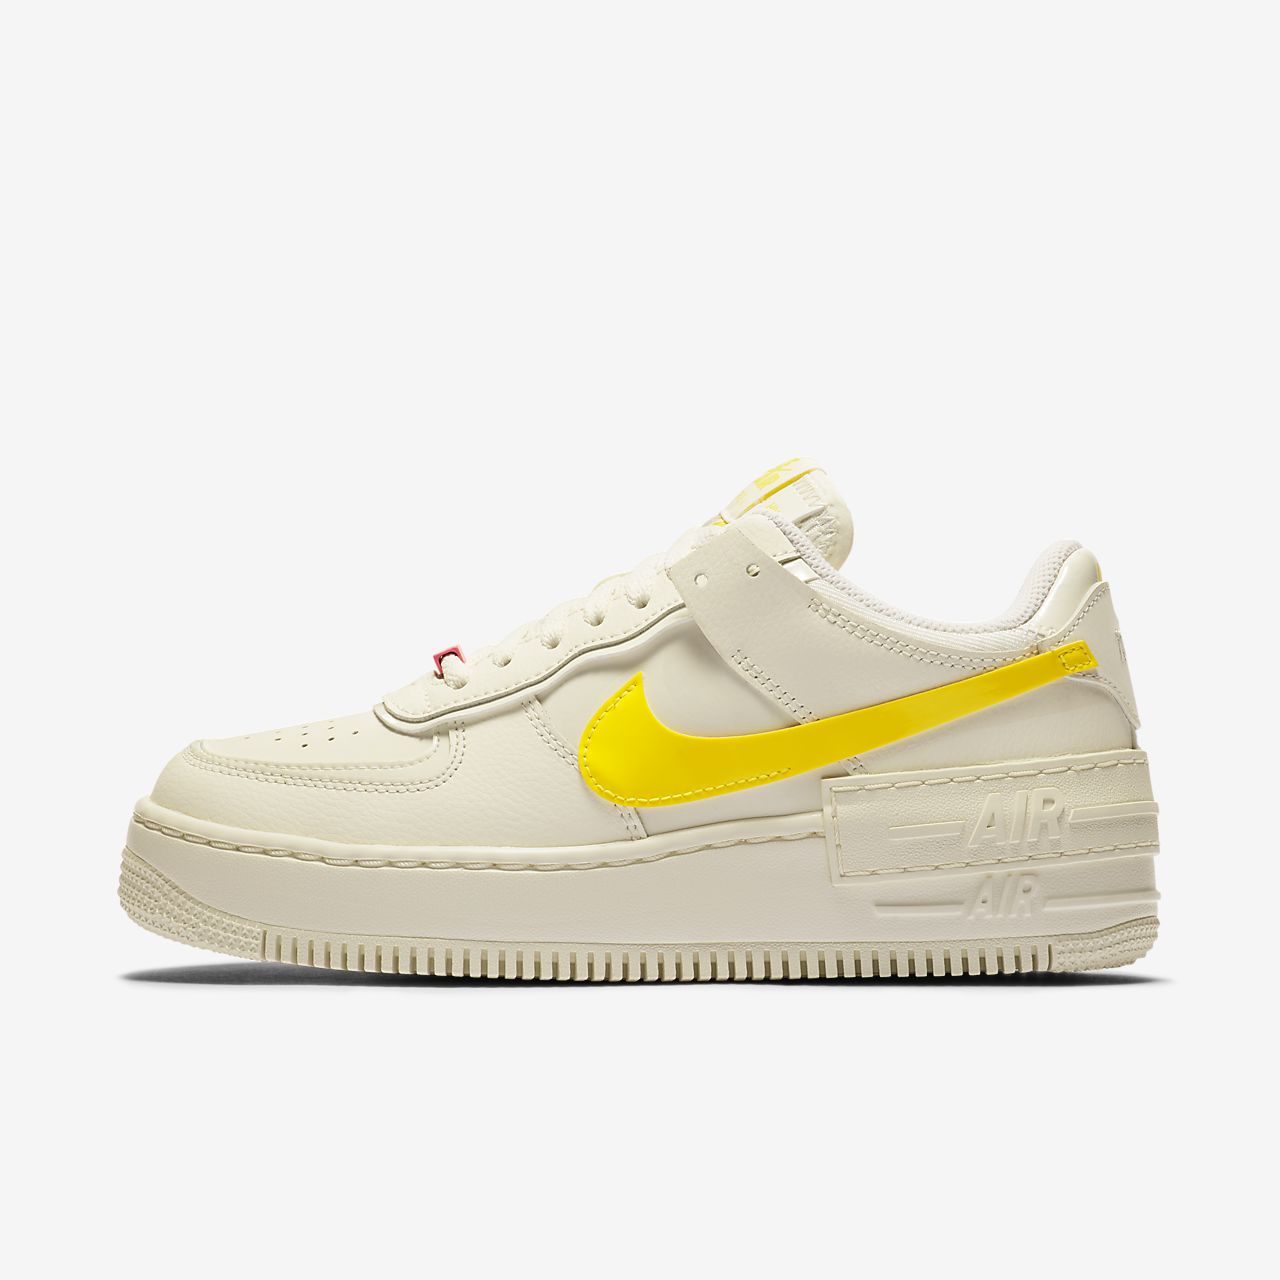 air force 1 yellow and pink